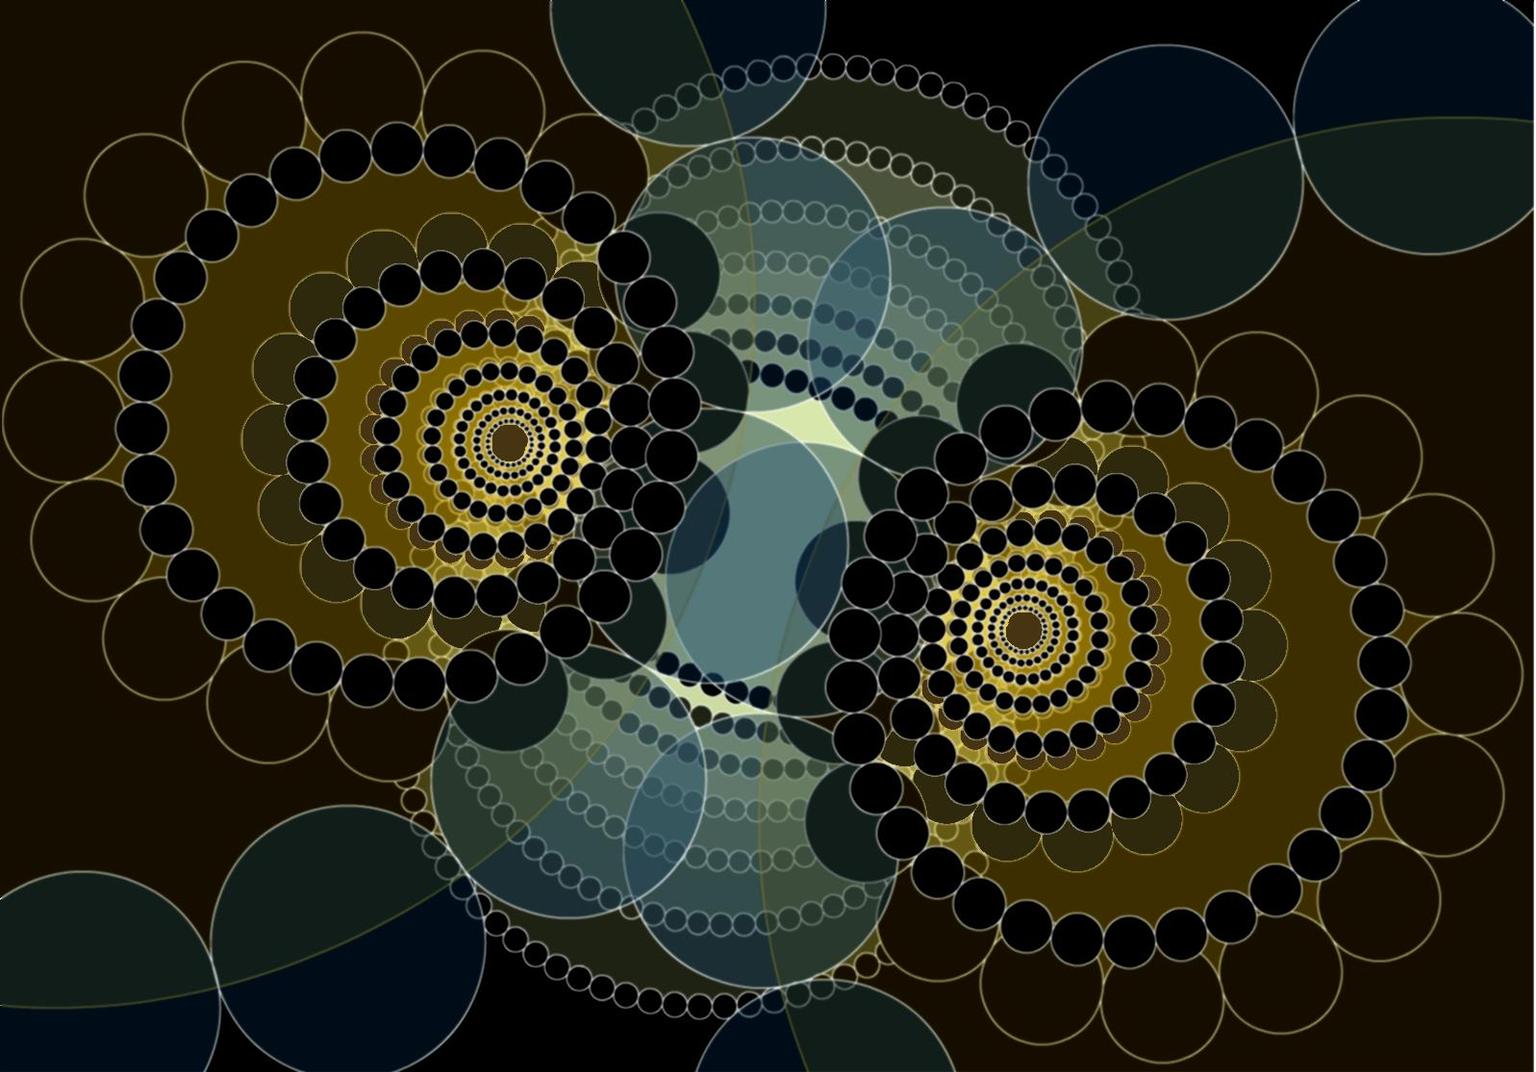 Image for entry 'Circles on Orthogonal Circles'